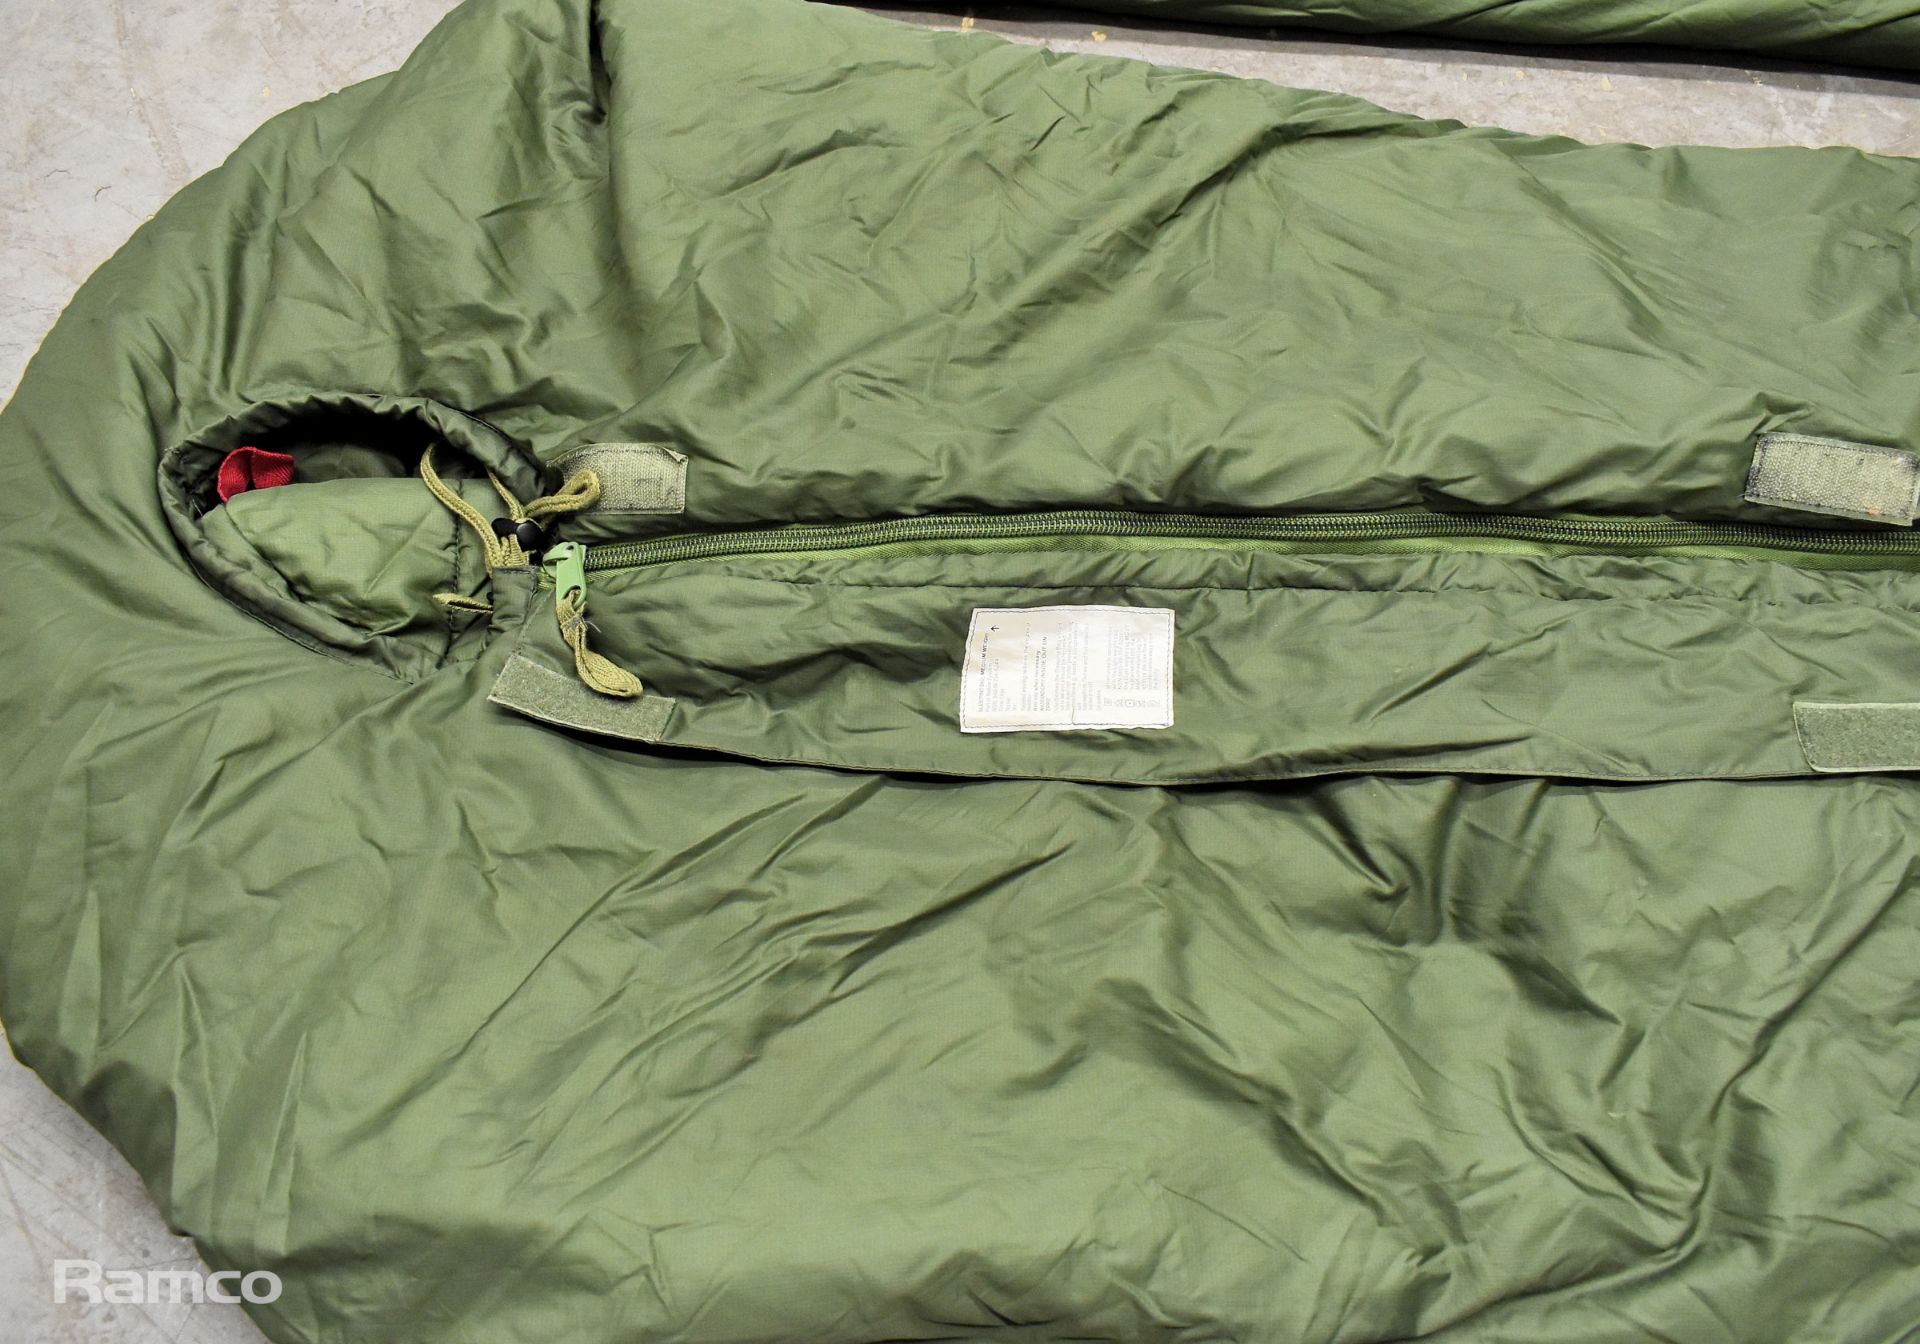 43x Sleeping bags - mixed grades and sizes - Image 6 of 8